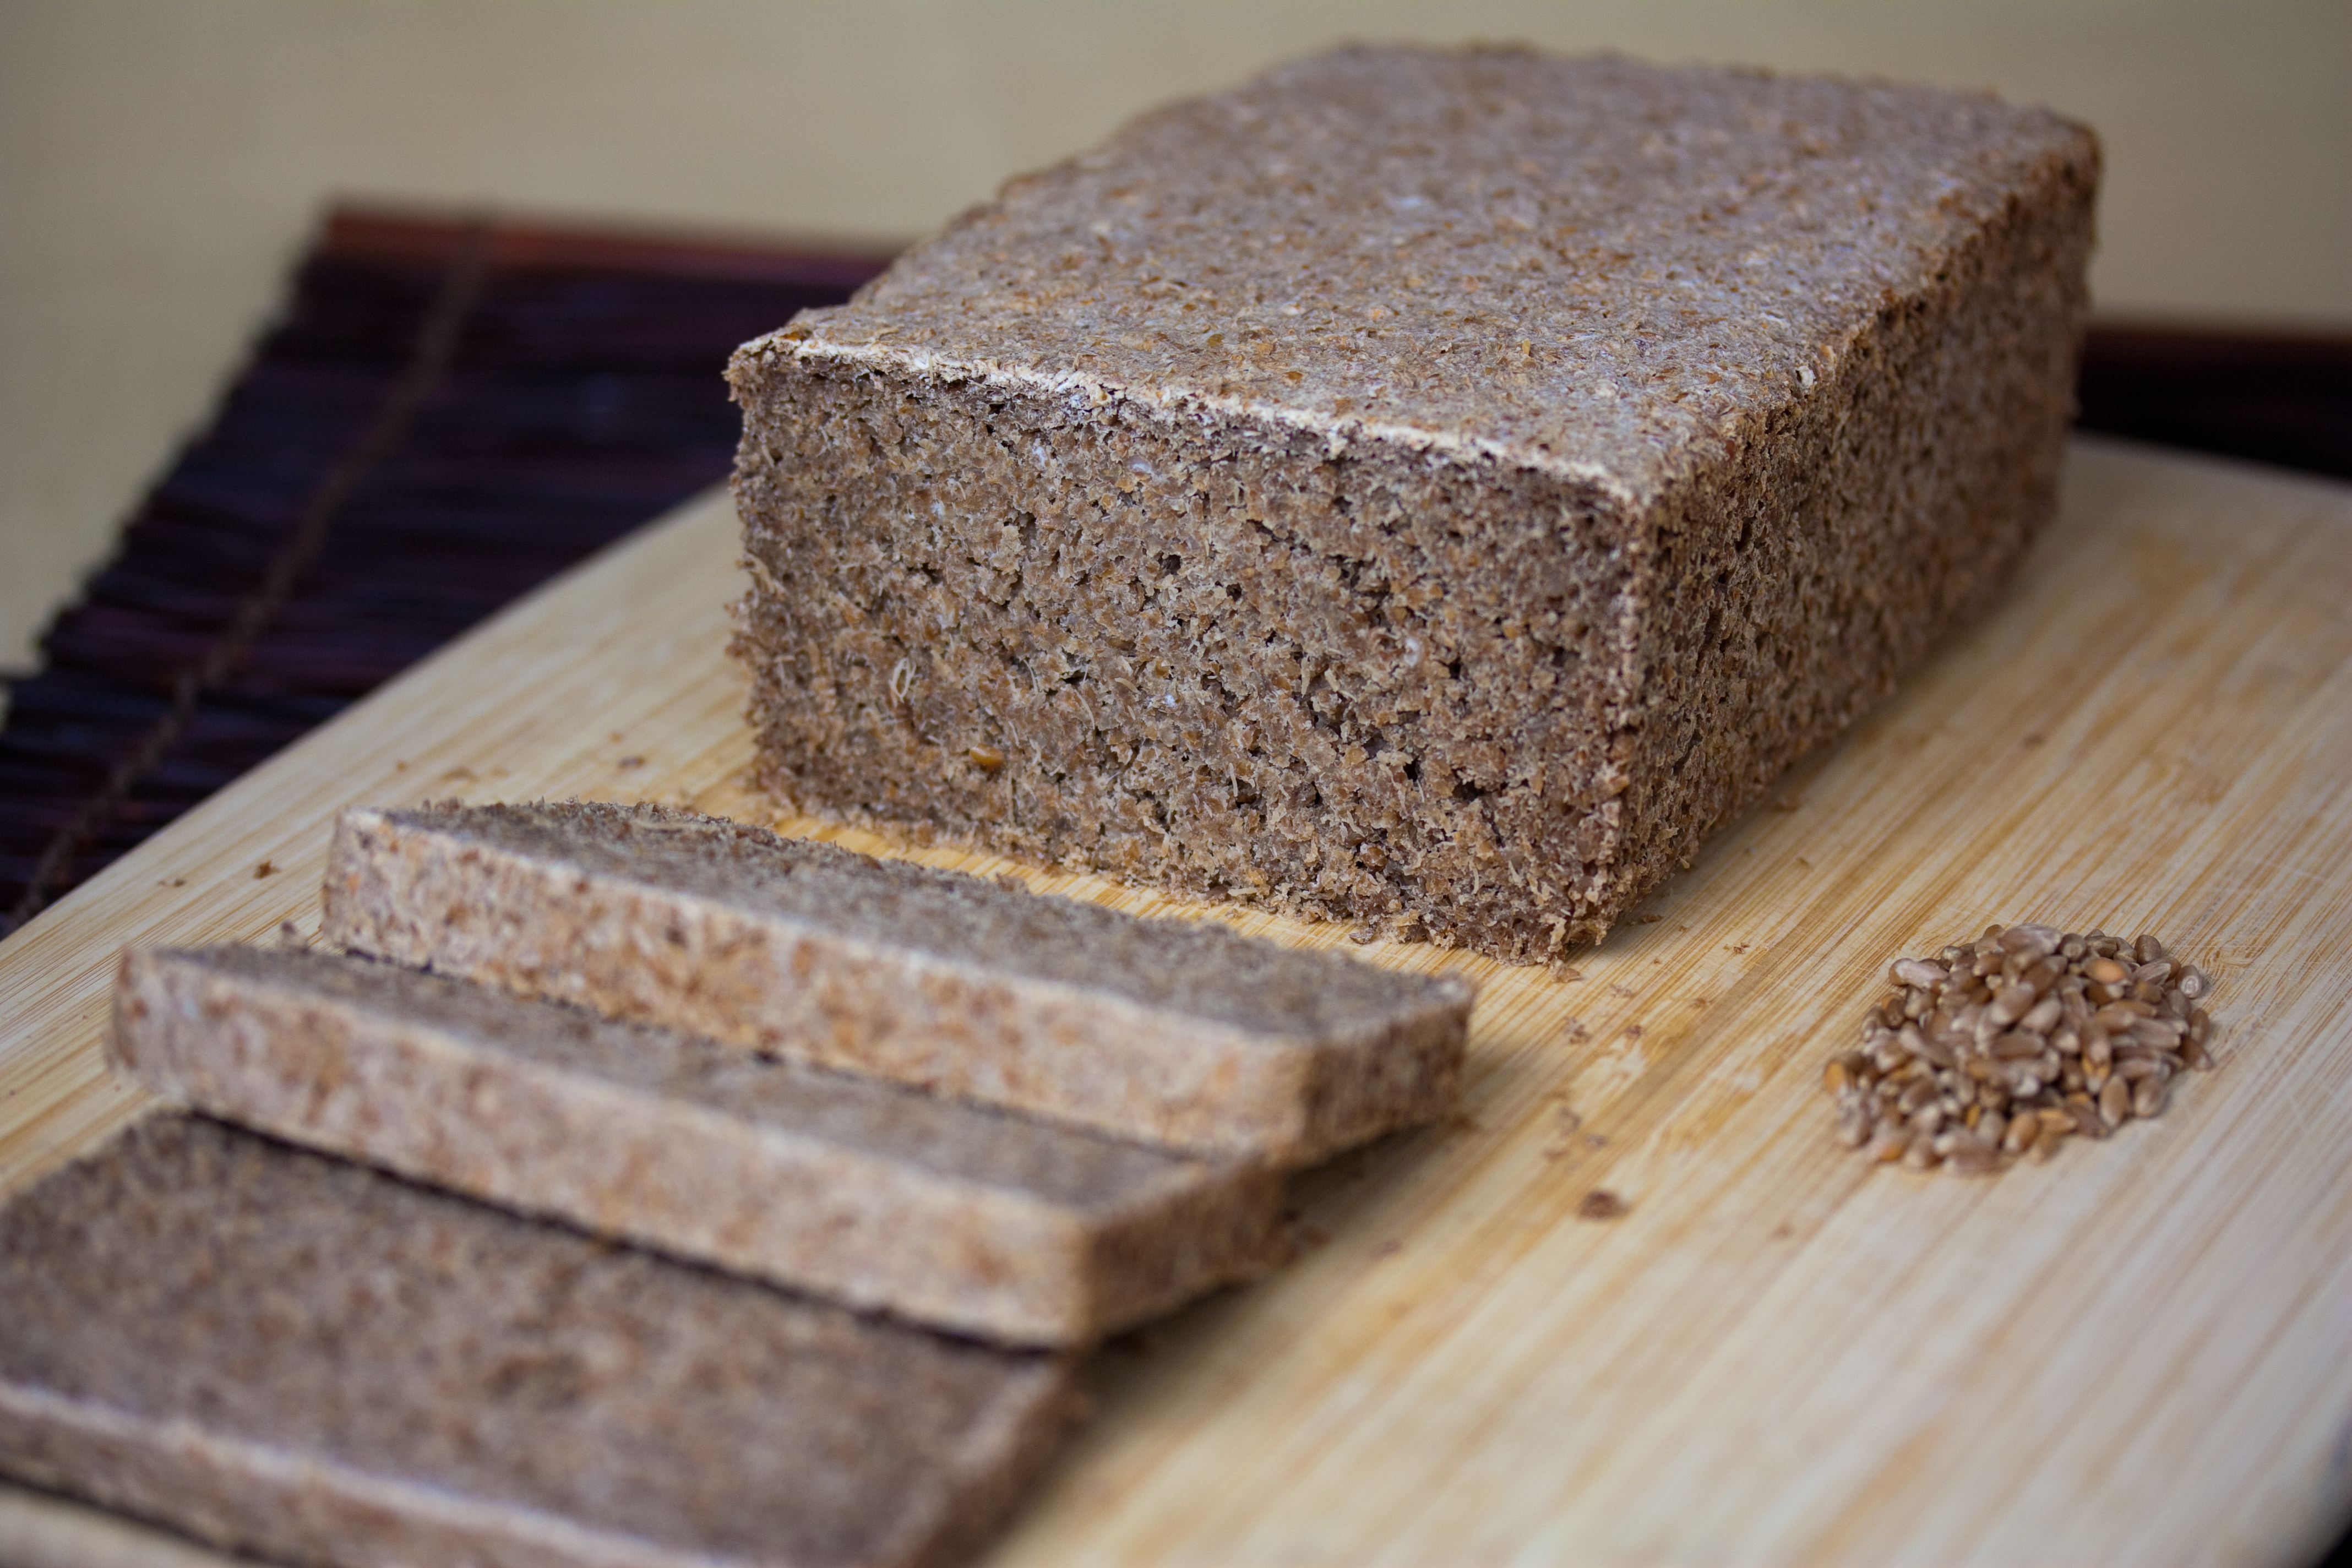 Sprouted Wild Yeasted Whole Wheat Bread (4656526411)